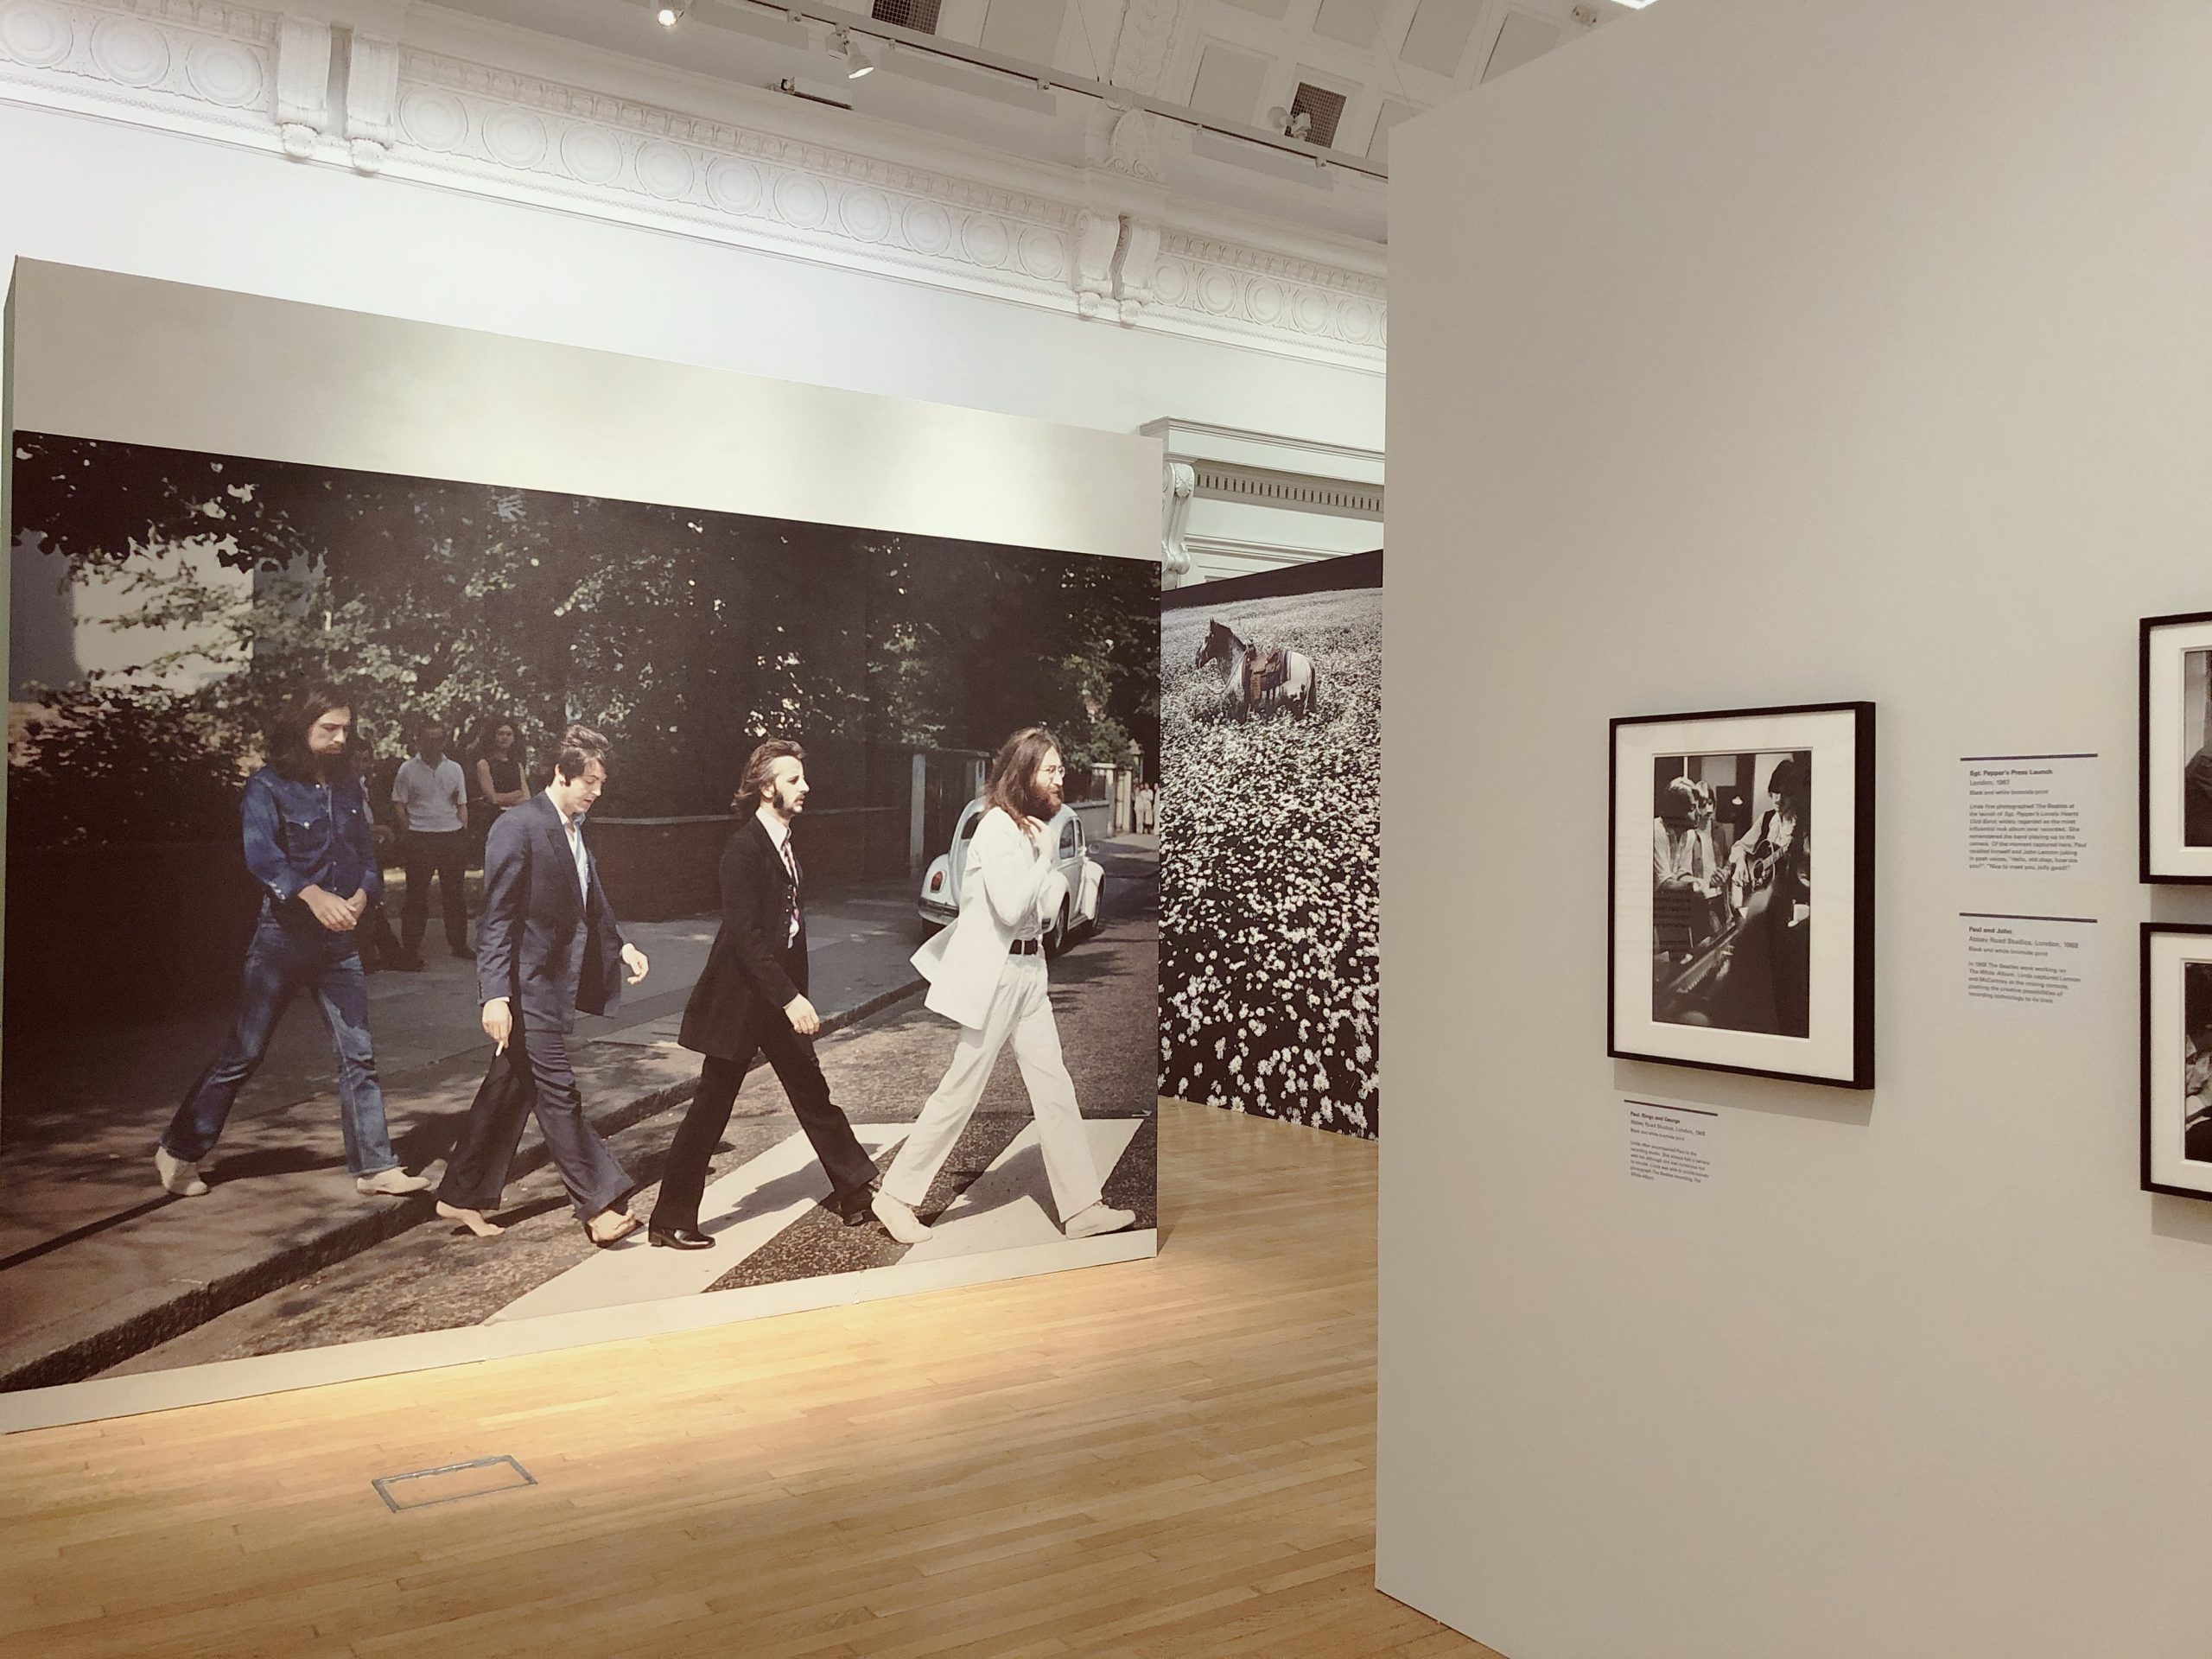 Photos of the Beatles hanging in a museum